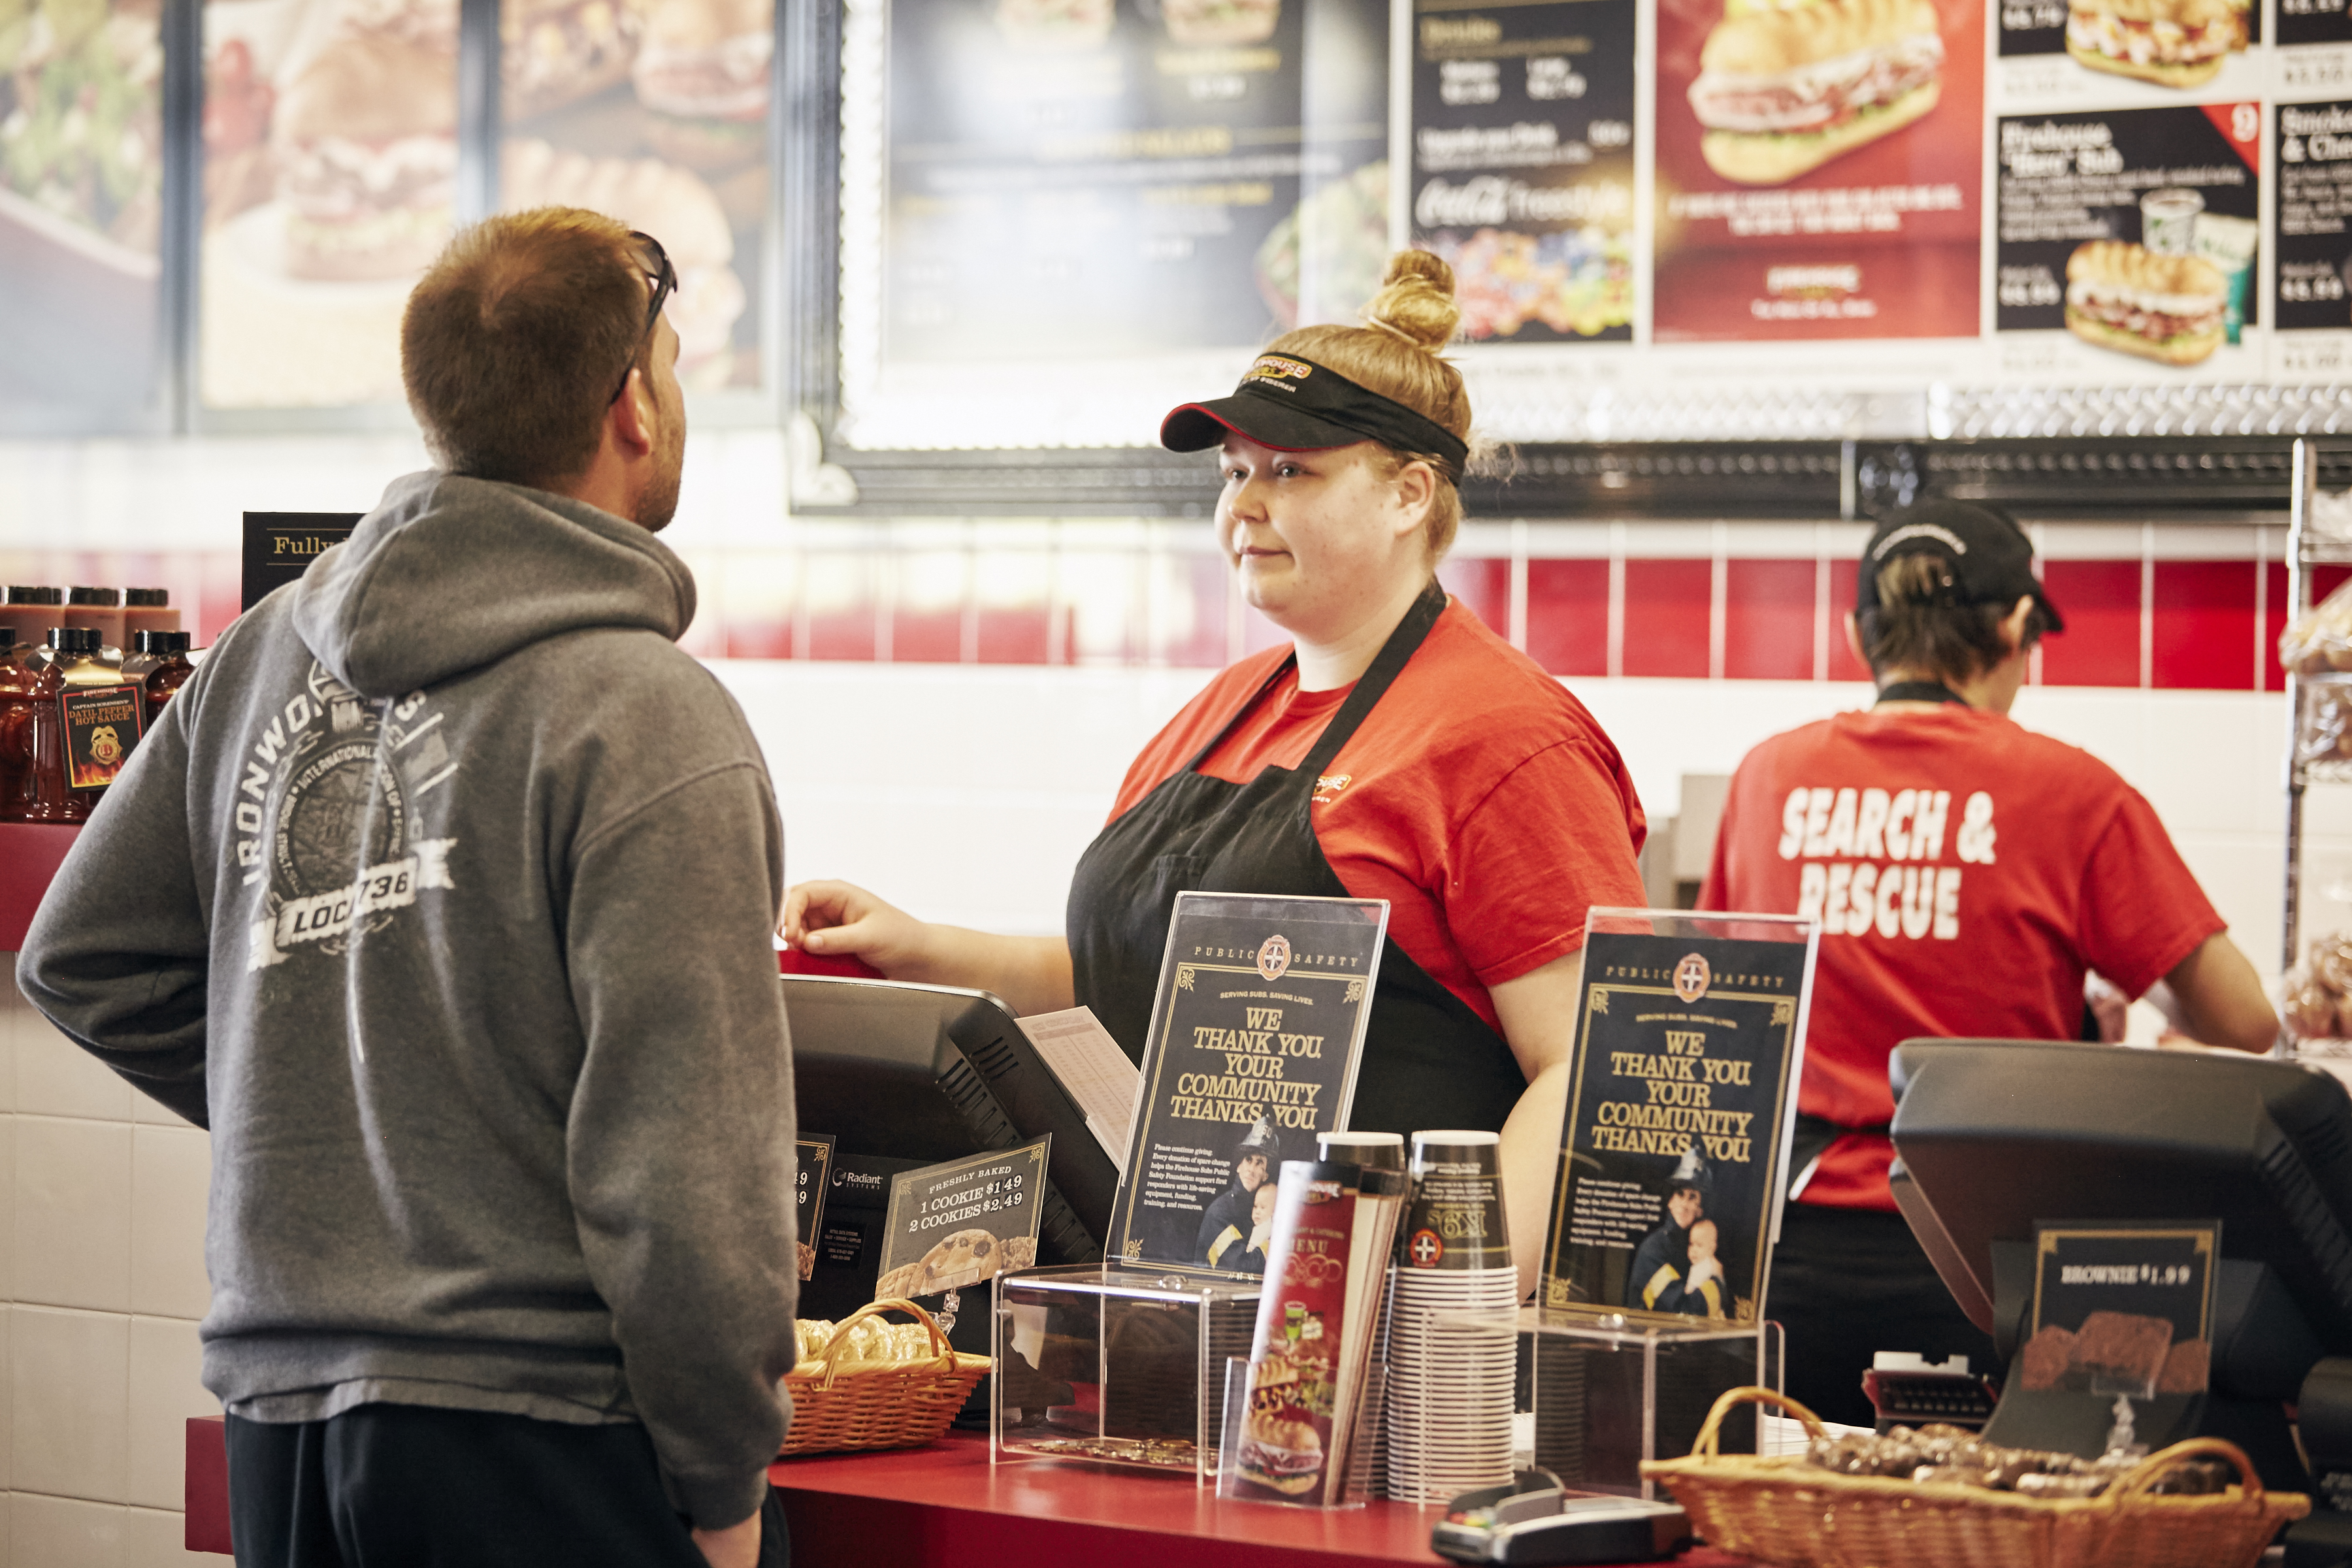 Customer ordering at the counter of Firehouse Subs restaurant